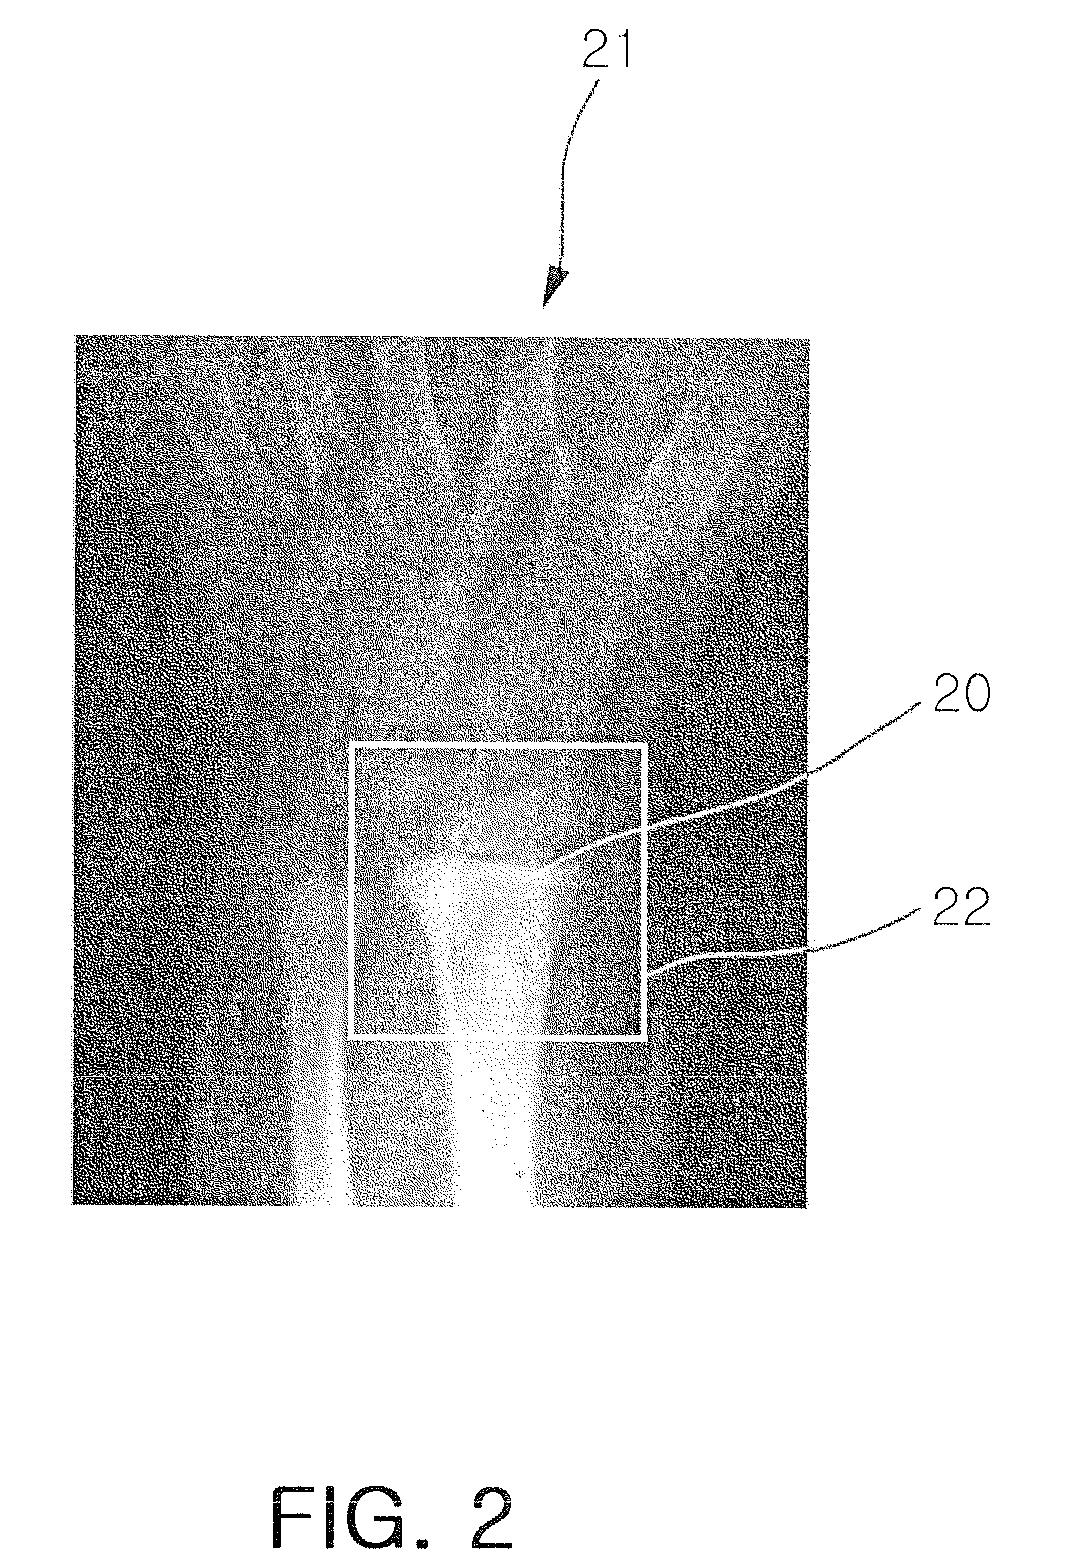 Method and system for extracting distal radius metaphysis